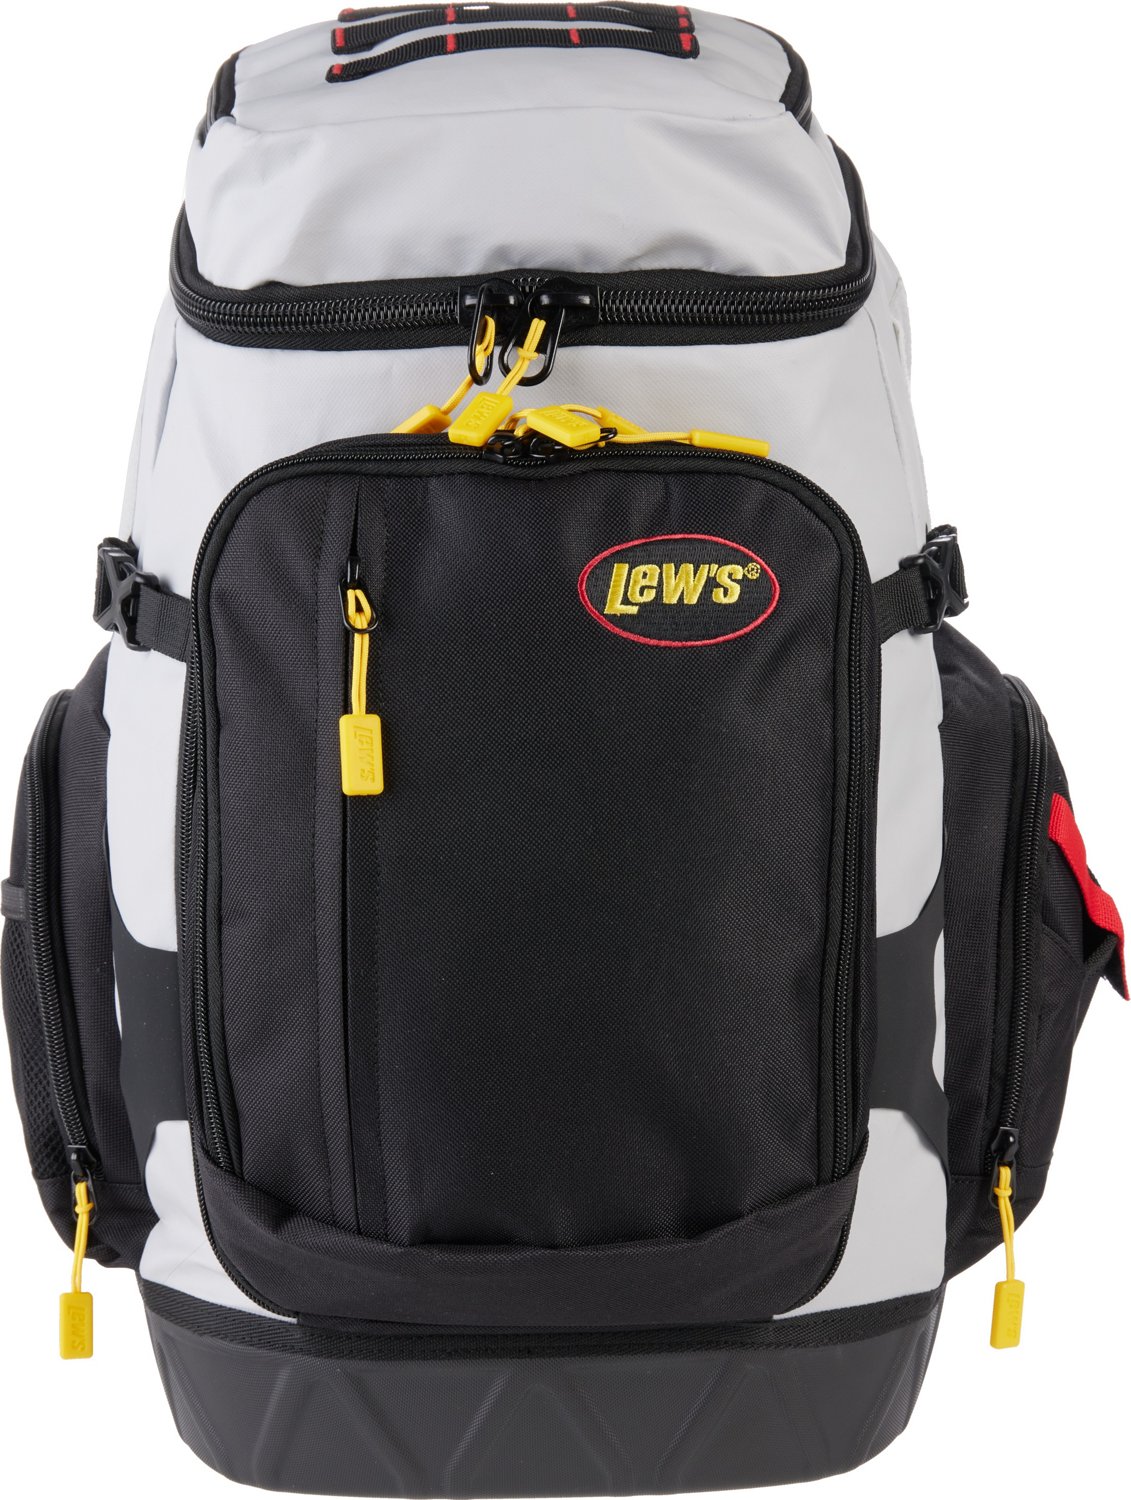 Lew's Fishing Tackle Boxes & Bags for sale